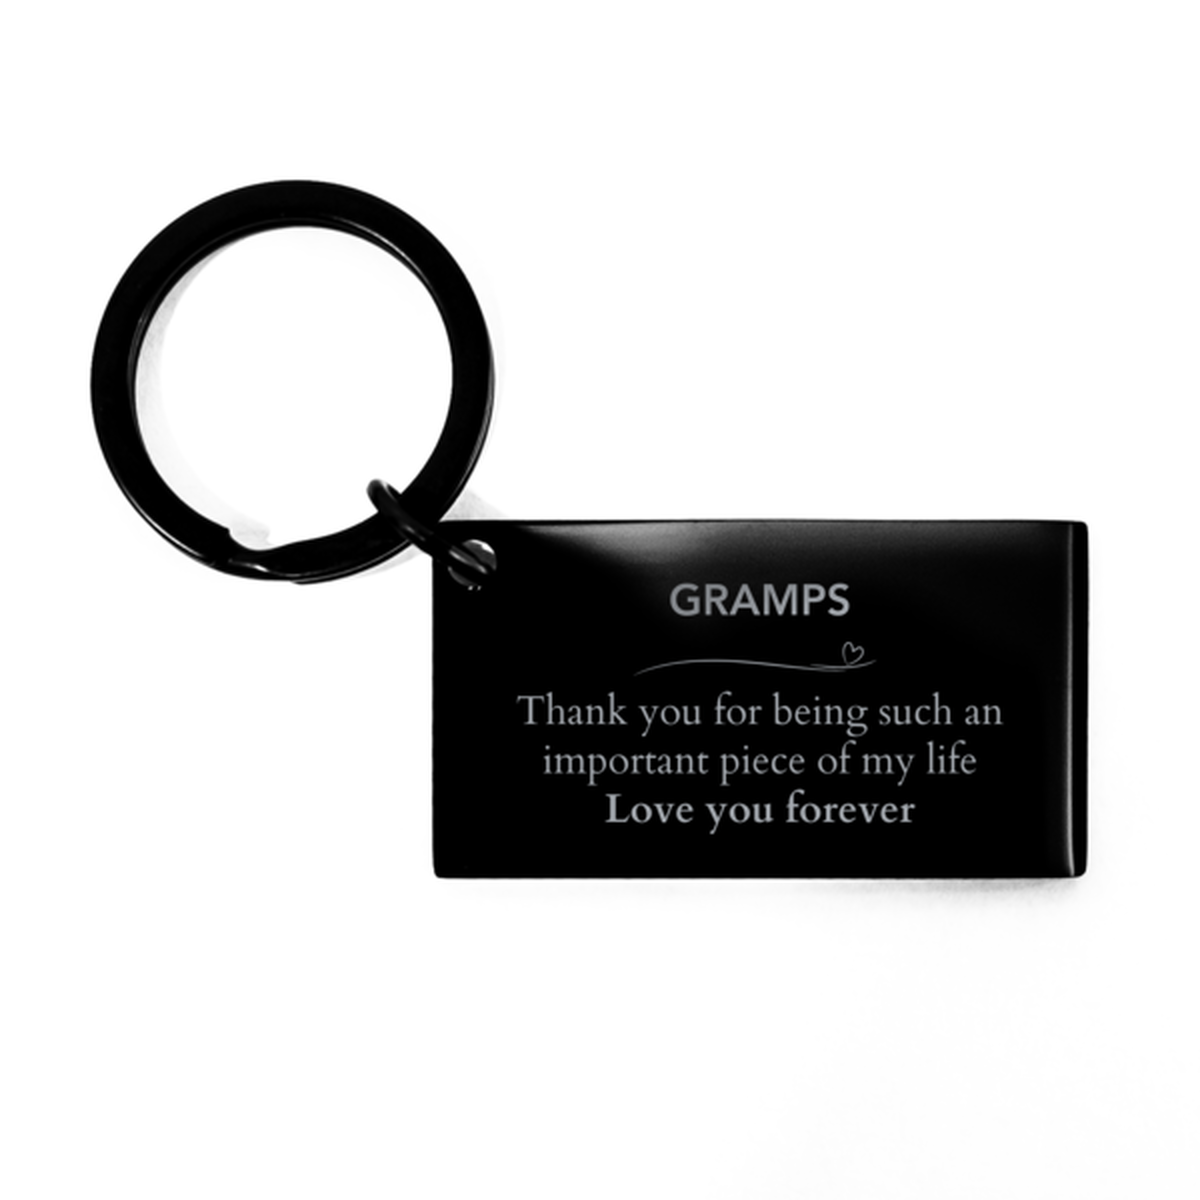 Appropriate Gramps Keychain Epic Birthday Gifts for Gramps Thank you for being such an important piece of my life Gramps Christmas Mothers Fathers Day